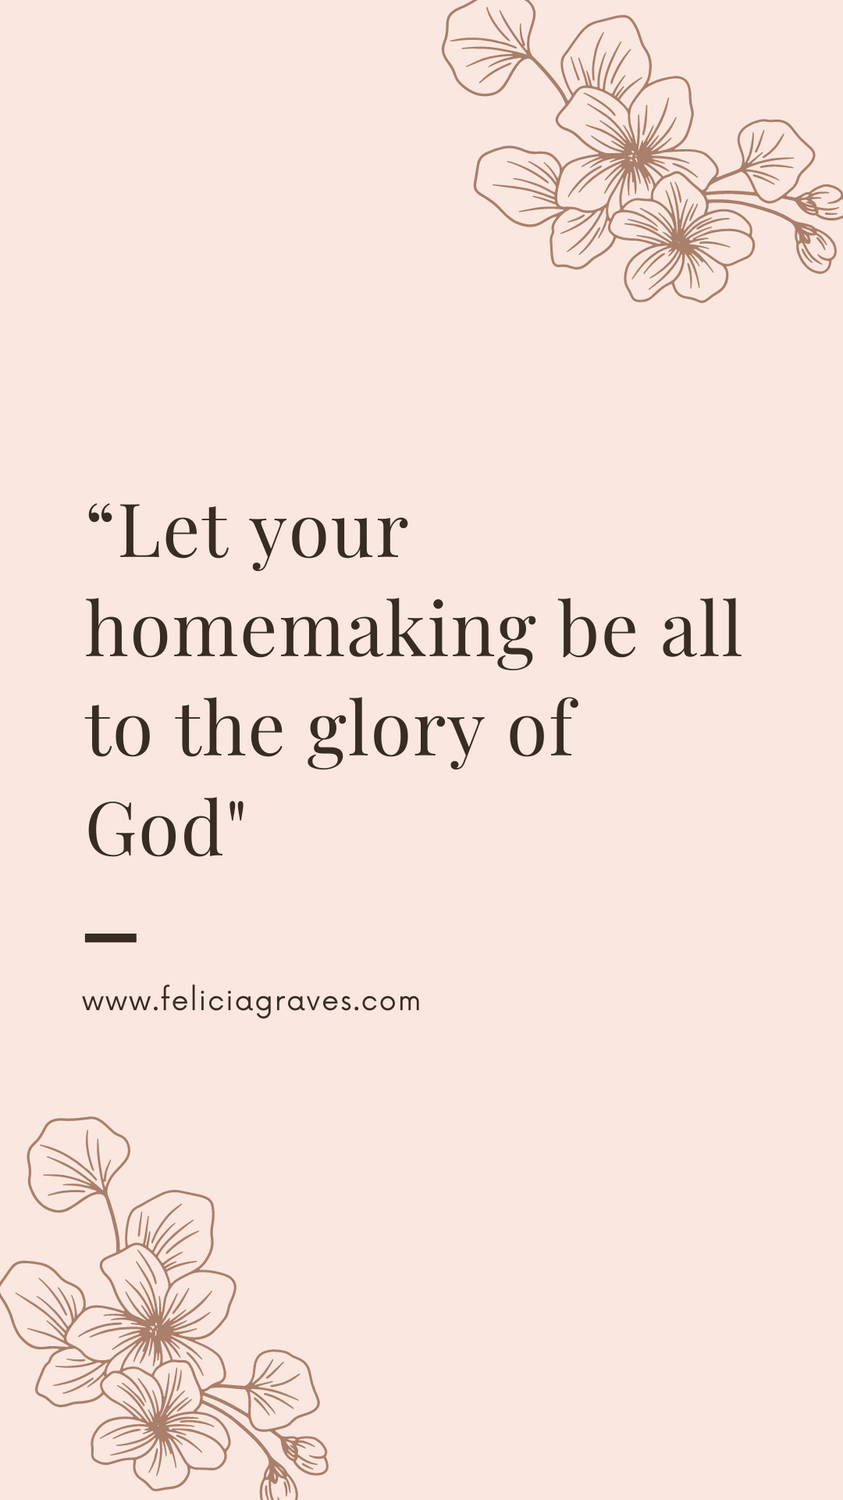 What does God say about homemakers?